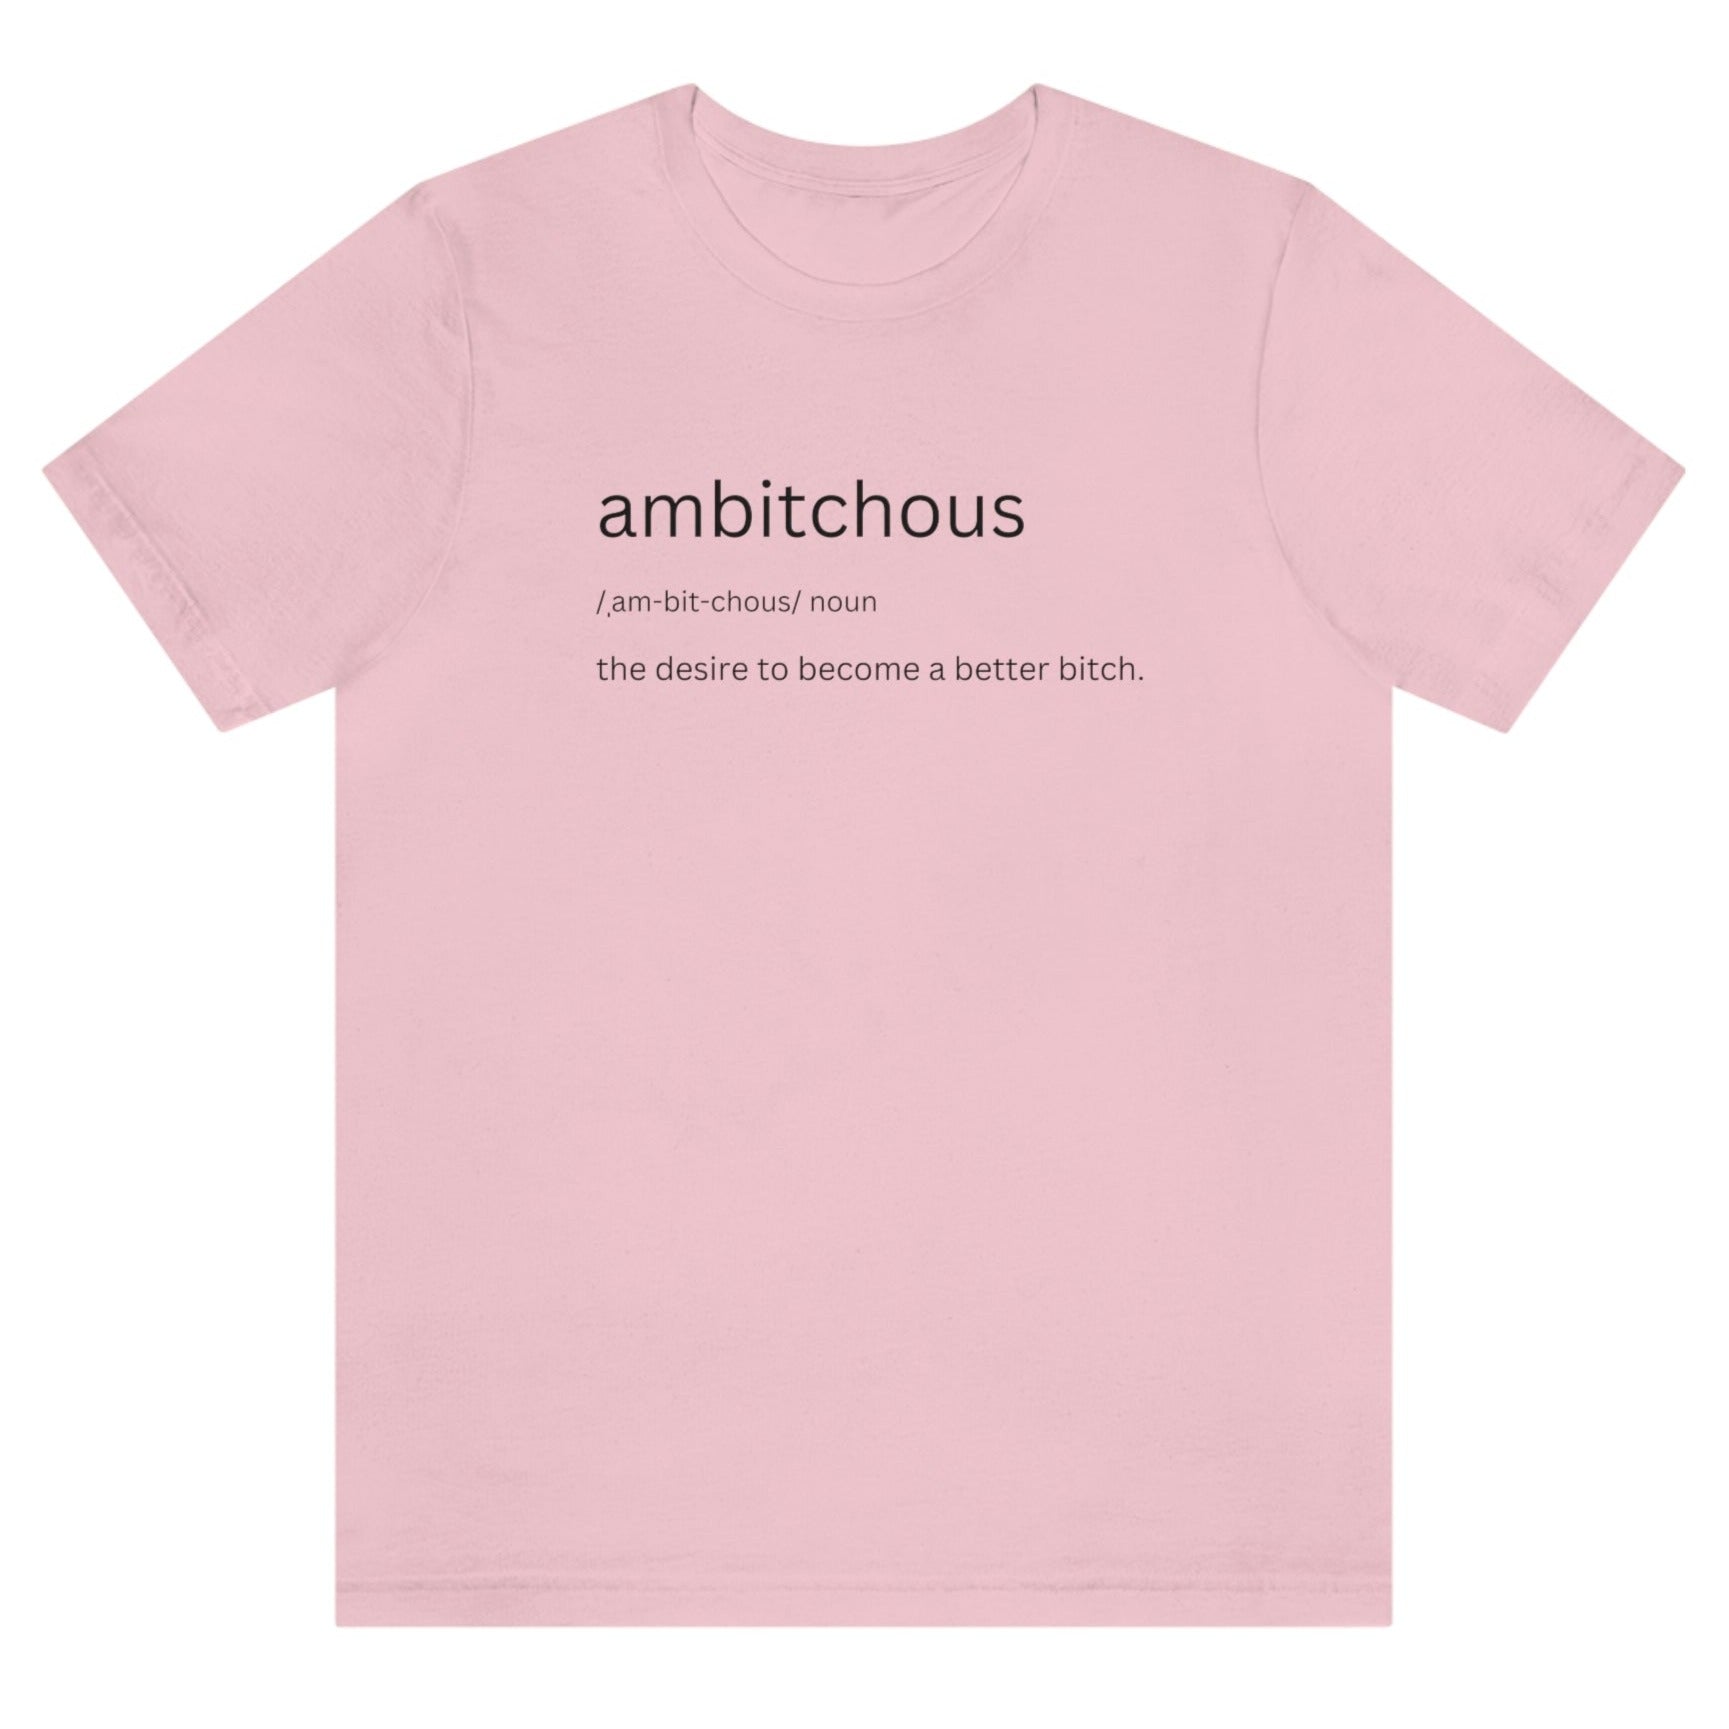 ambitchous-the-desire-to-become-a-better-bitch-pink-t-shirt-womens-funny-definition